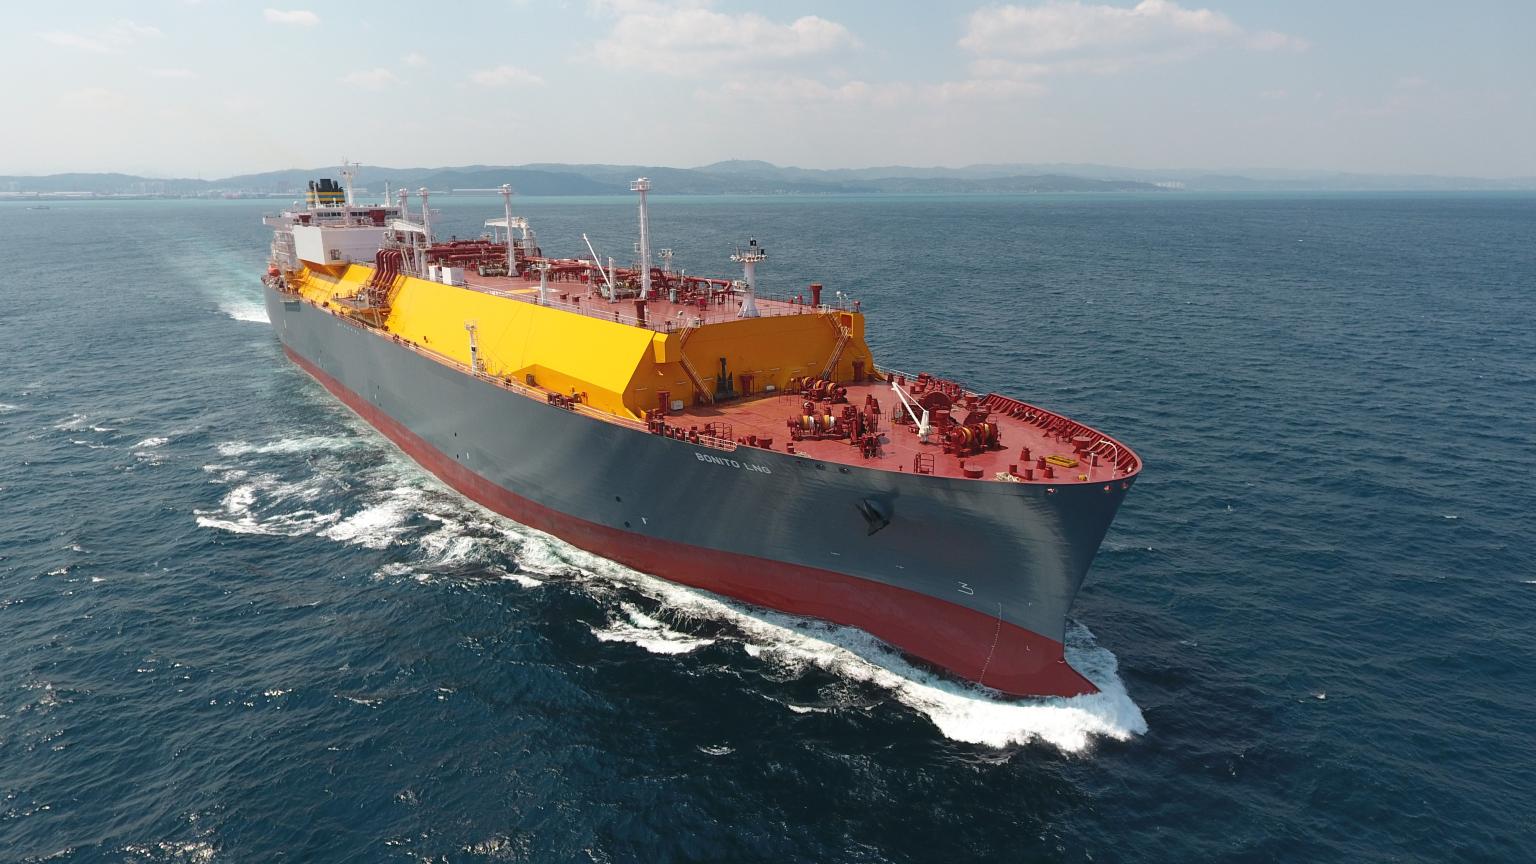 Seatrium scoops contract for TMS Cardiff Gas LNG carriers repairs and upgrades